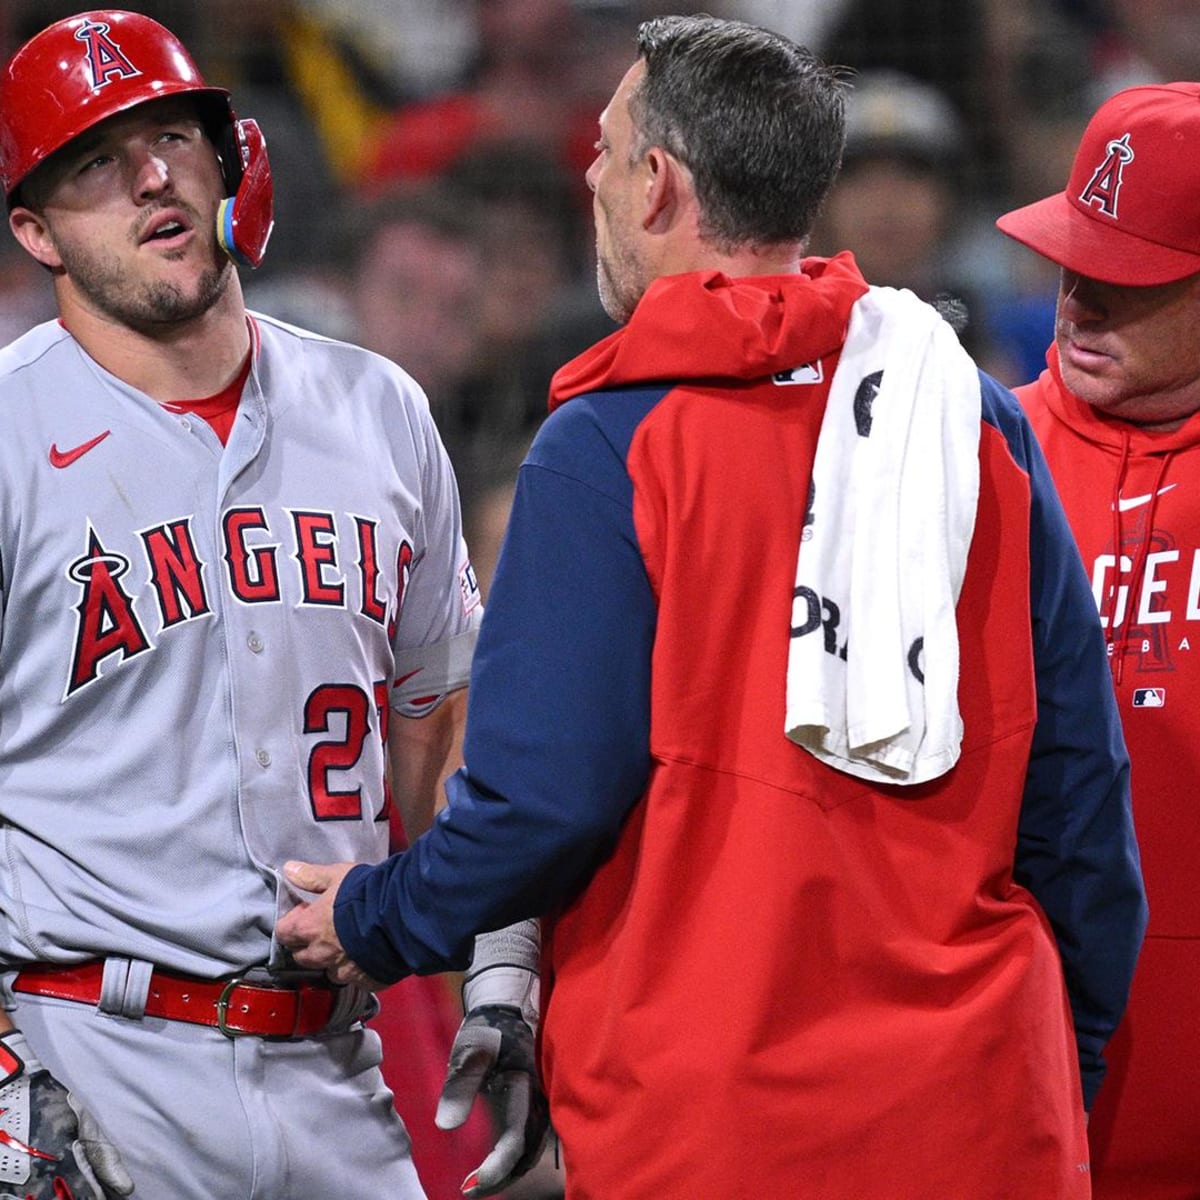 Angels try to stay positive after Mike Trout, Shohei Ohtani hurt